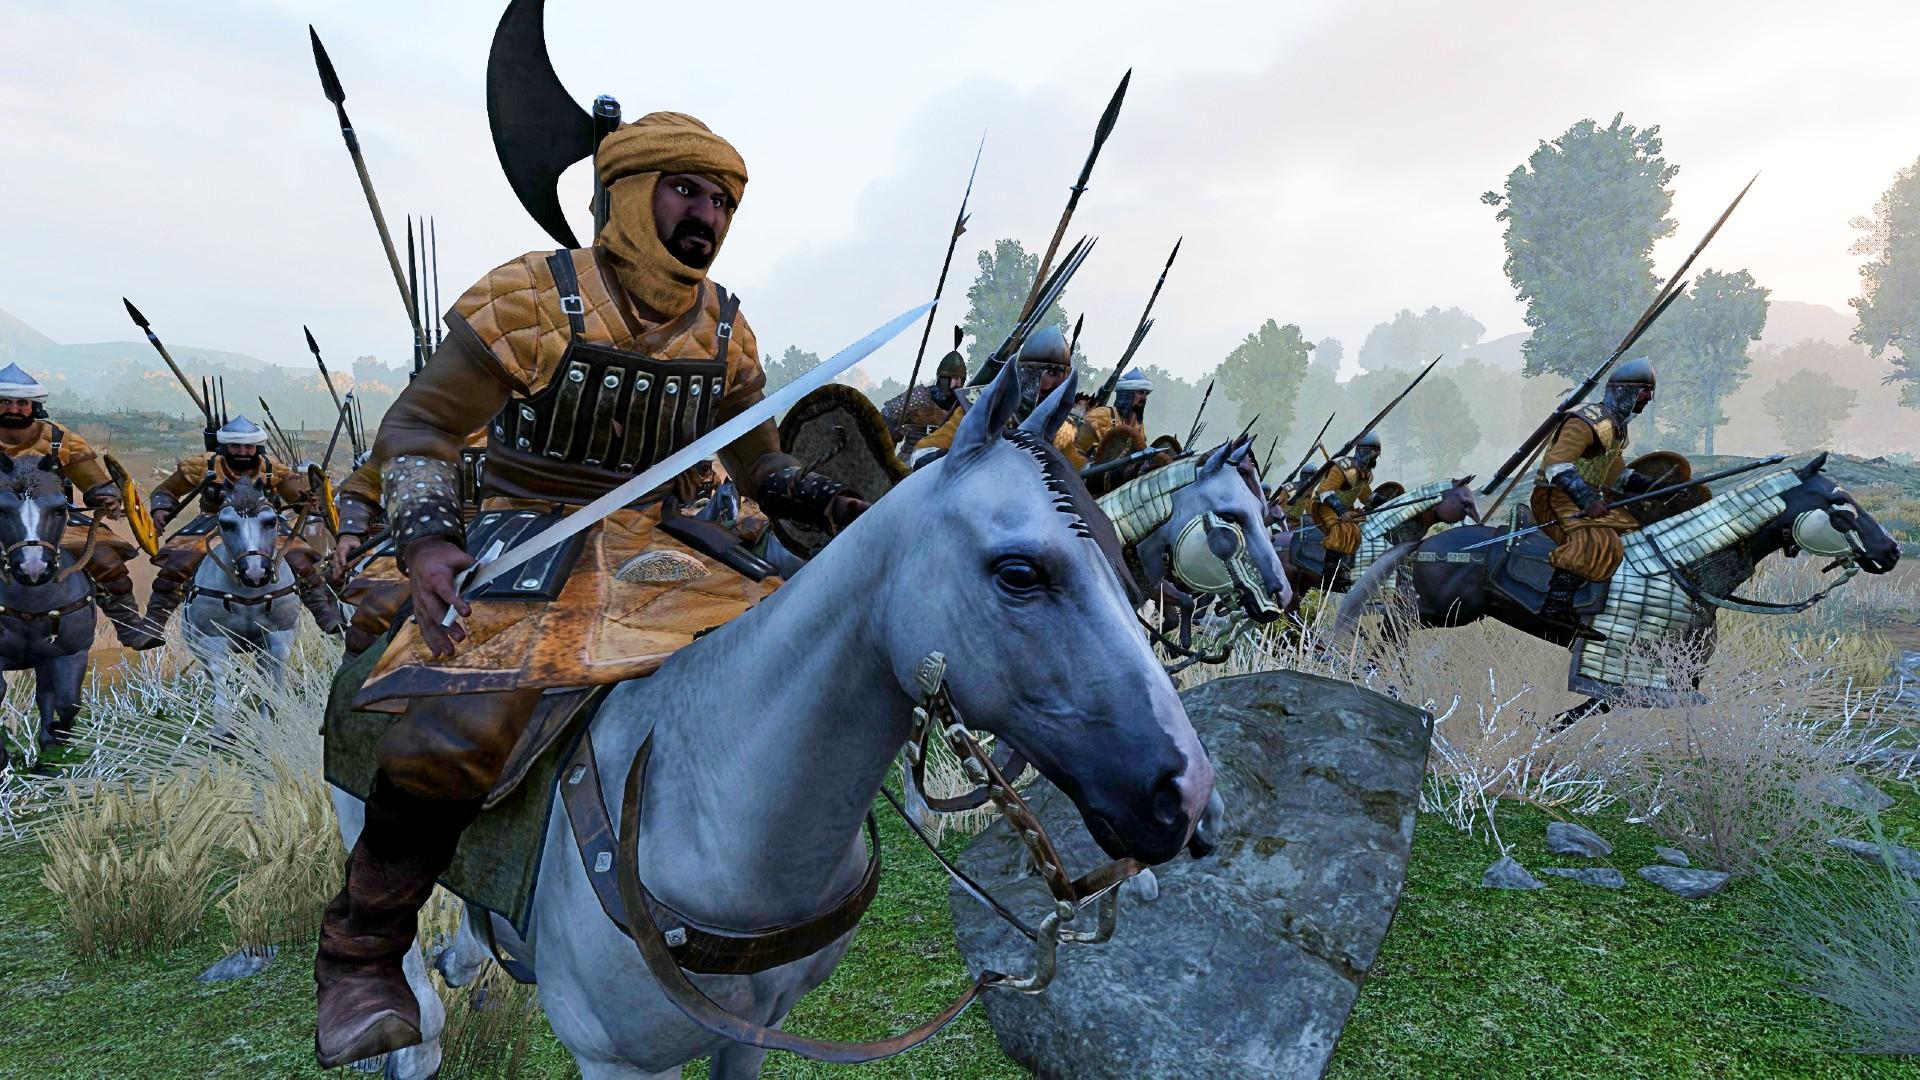 Mount and Blade 2: Bannerlord mod adds Total War battle camera